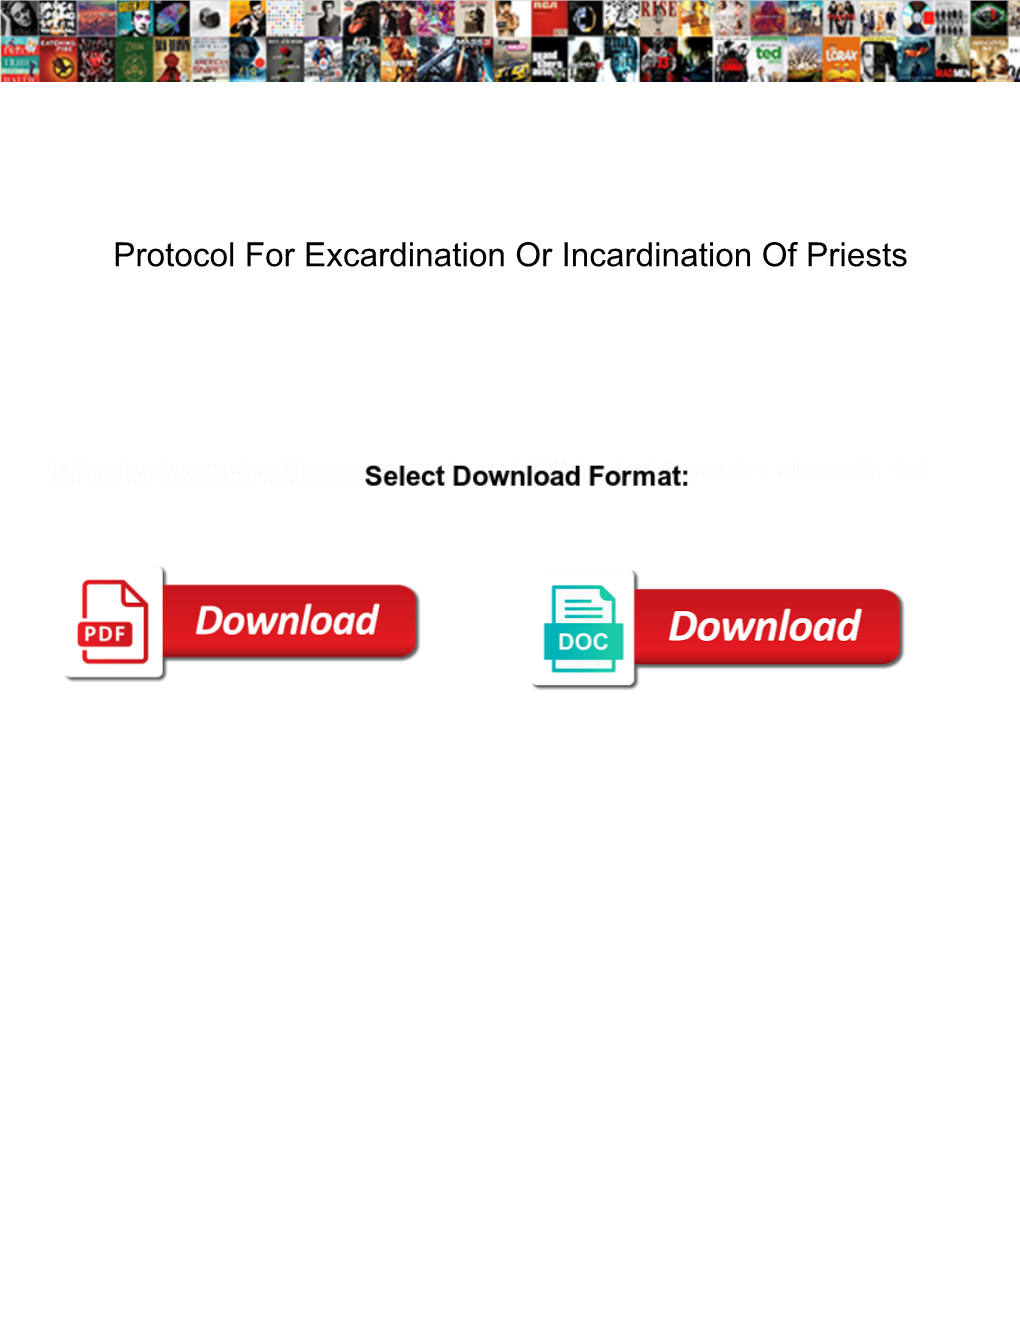 Protocol for Excardination Or Incardination of Priests